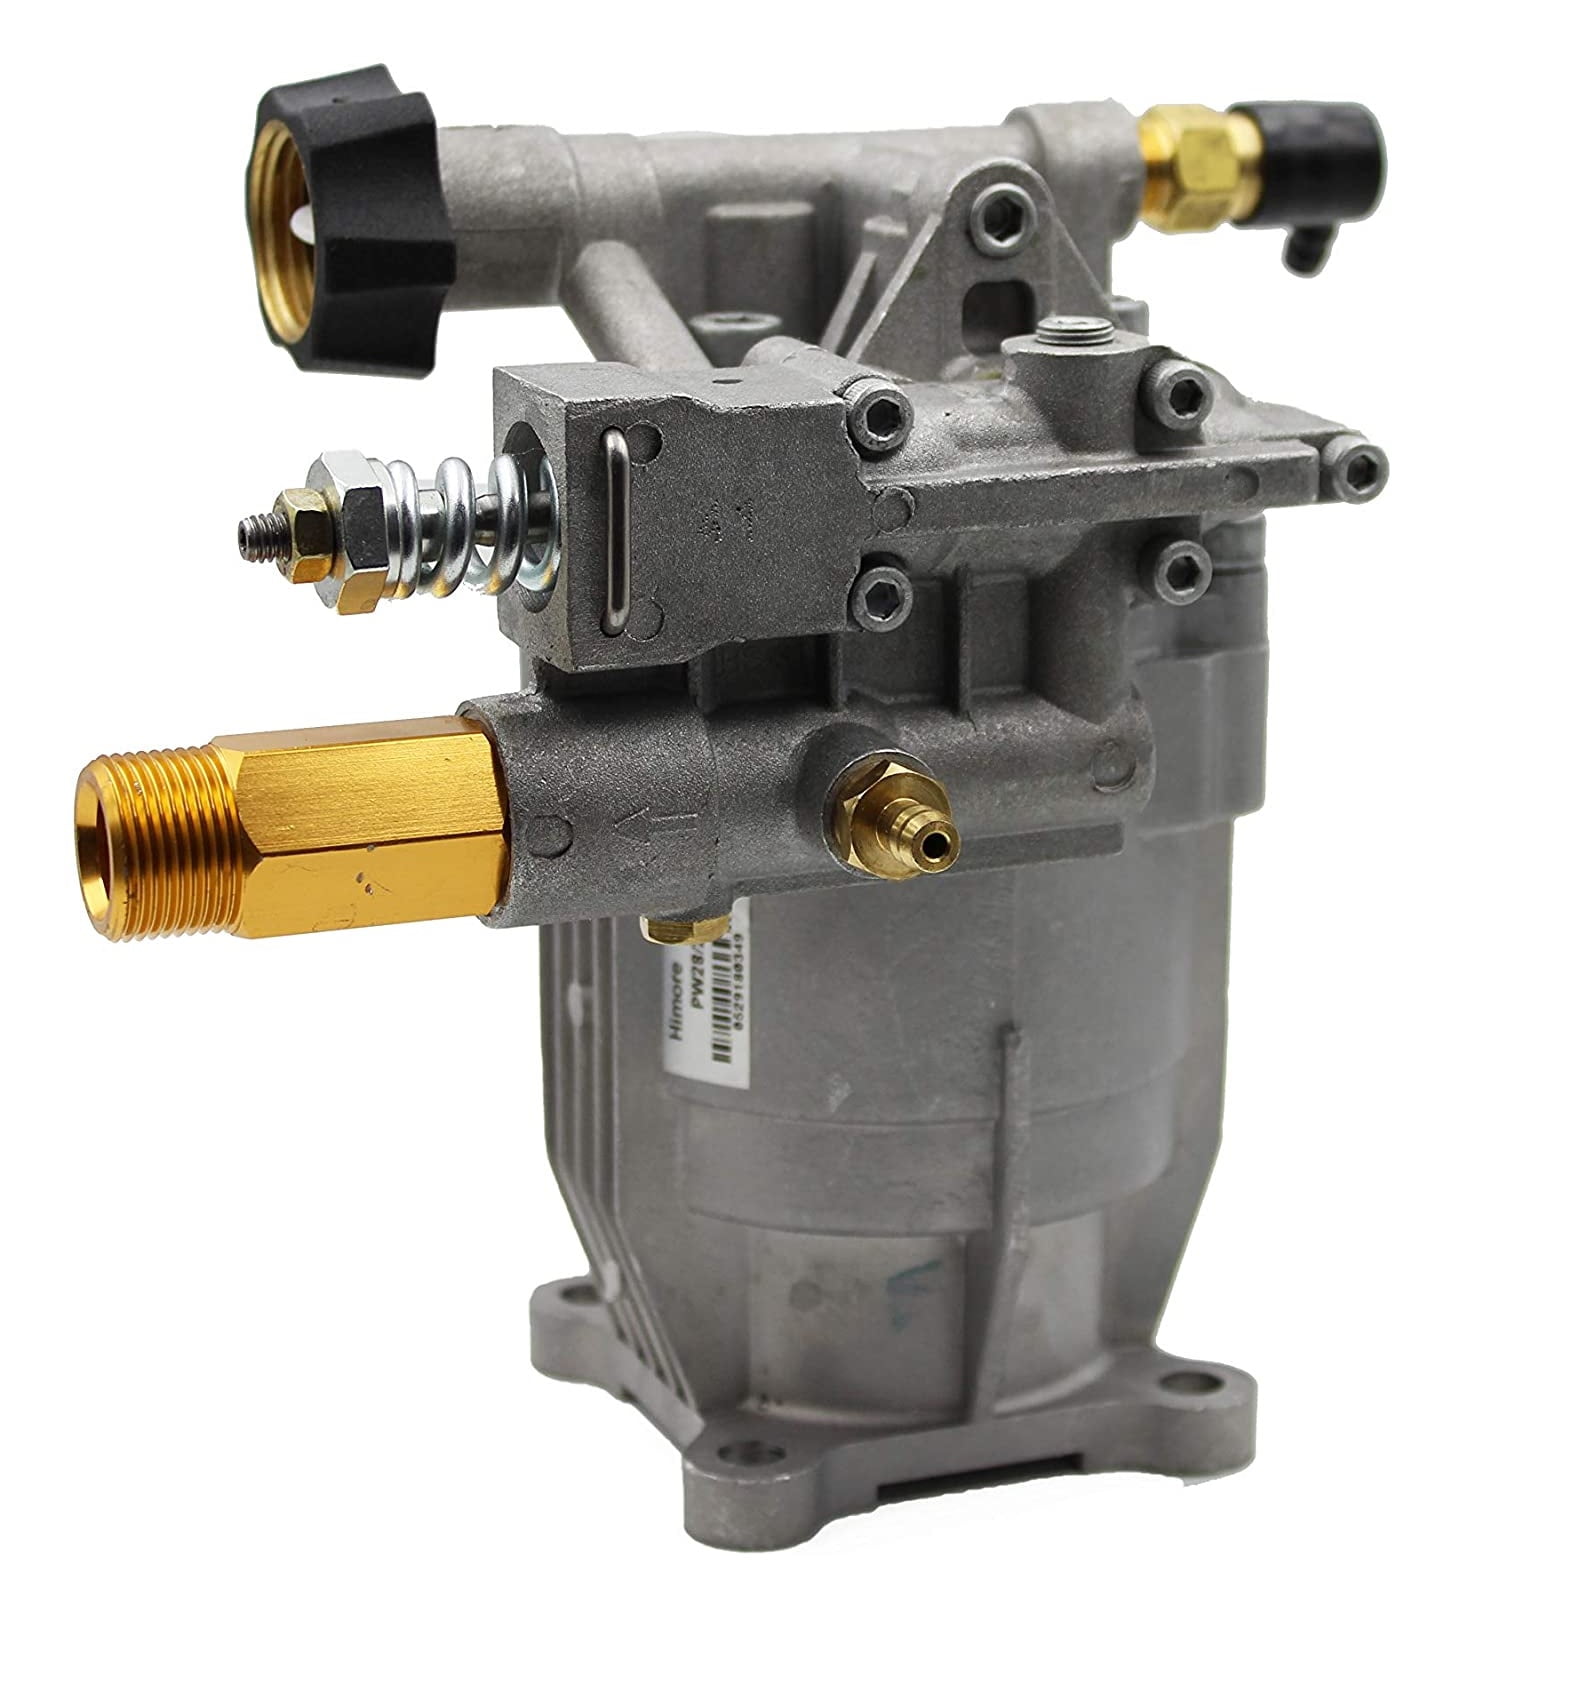 PRESSURE WASHER PUMP Replace A01801 D28744 A14292 XR2500 XC2600 EXCELL DEVILBISS 